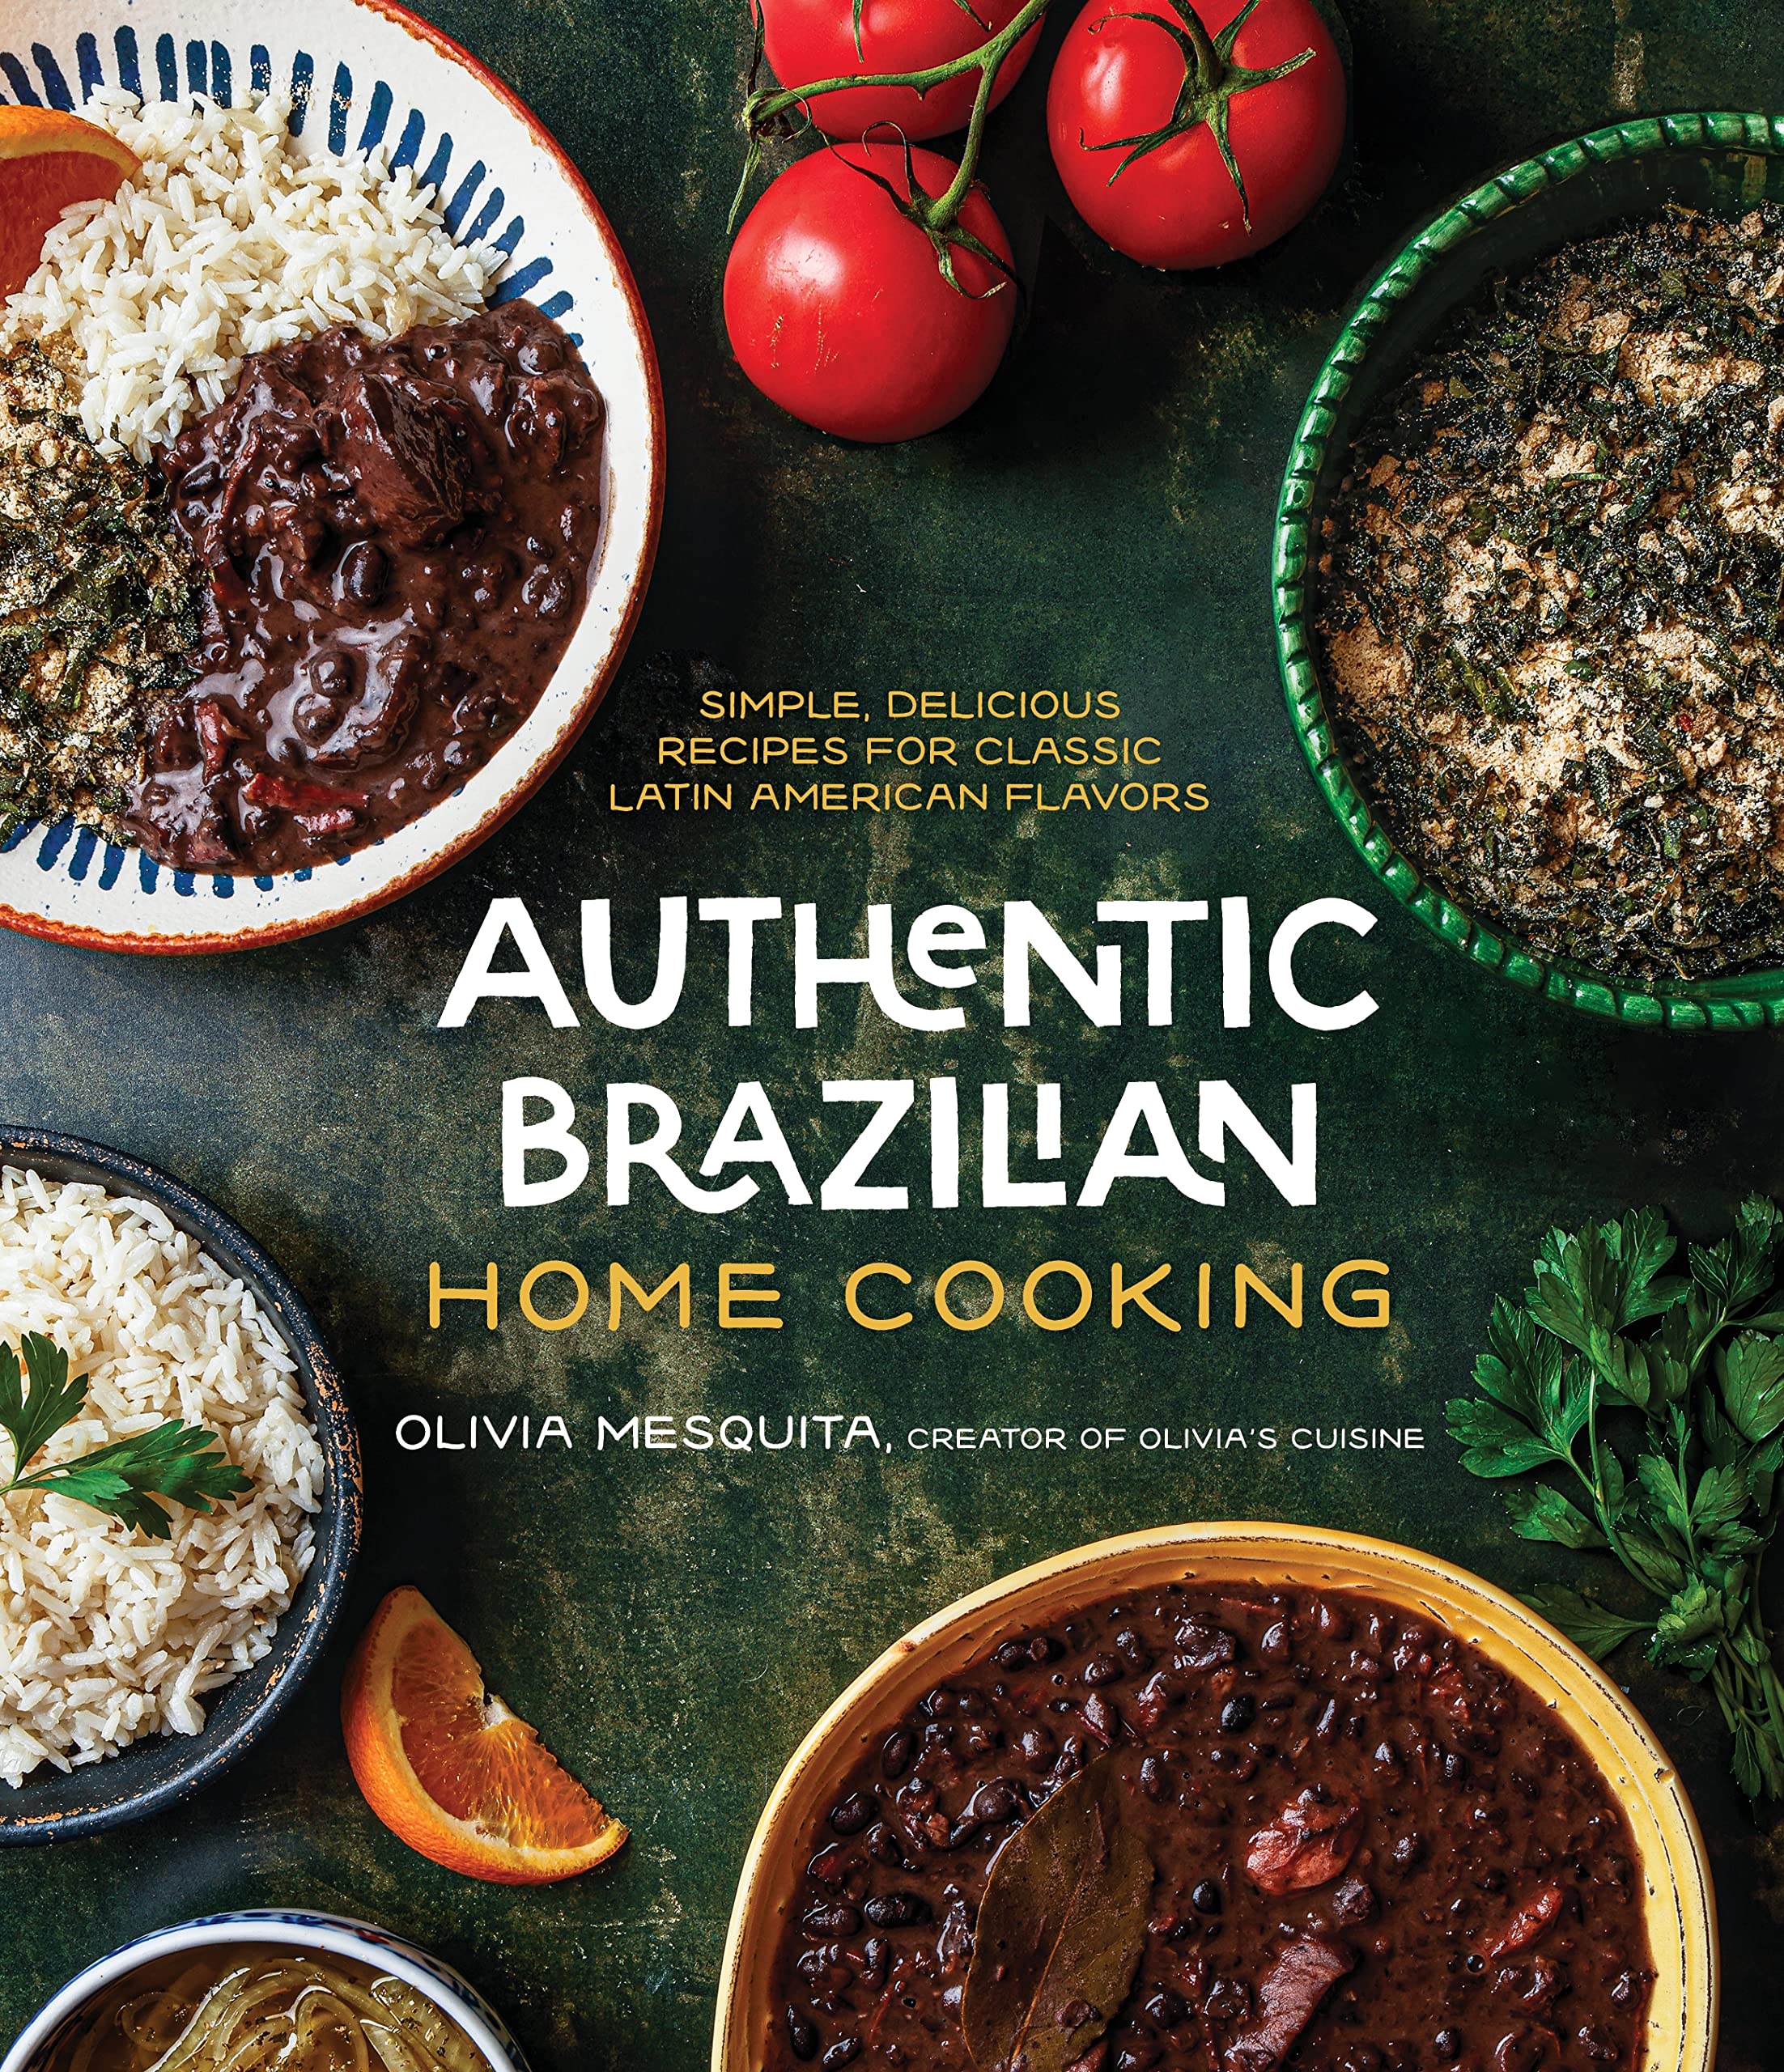 Authentic Brazilian Home Cooking: Simple, Delicious Recipes for Classic Latin American Flavors (Olivia Mesquita)